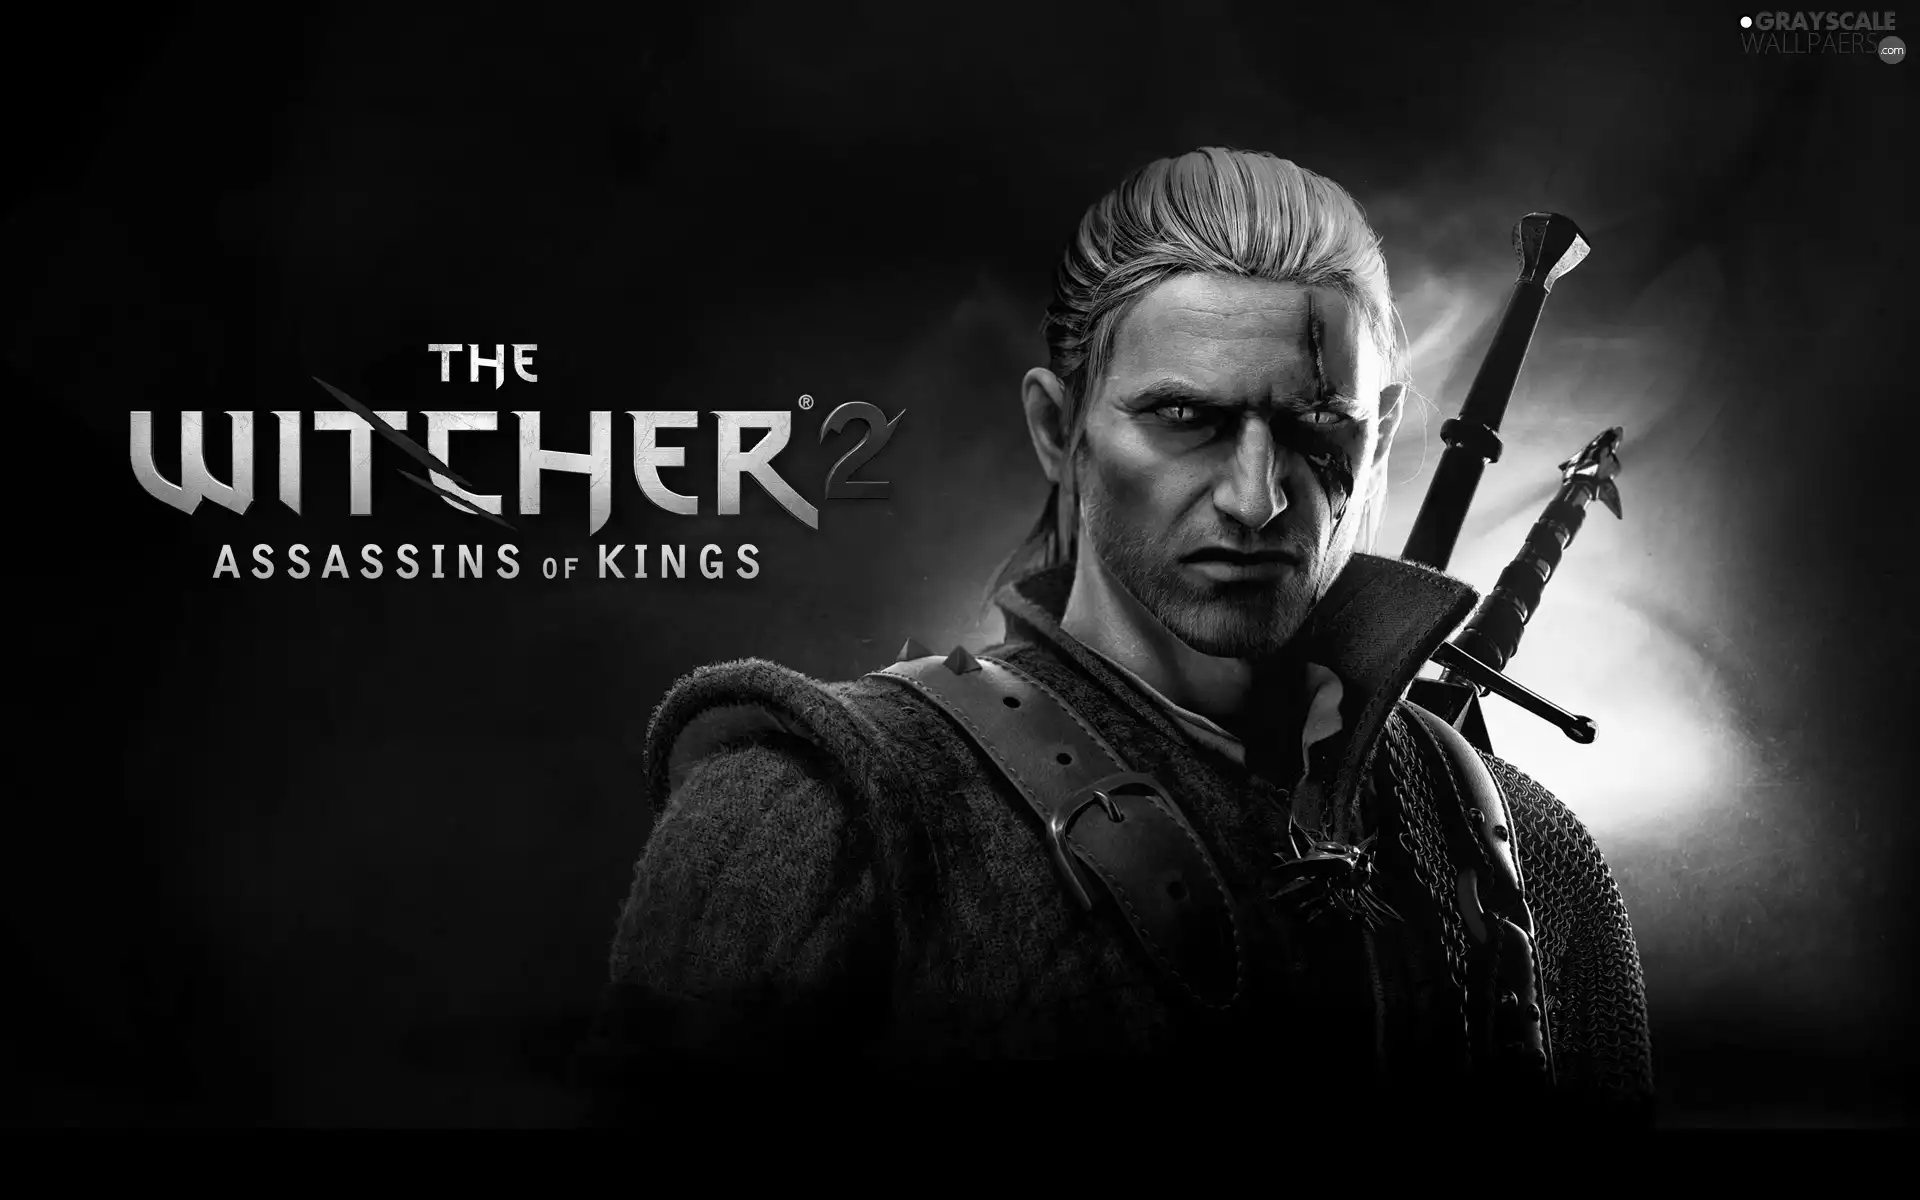 Swords, The Witcher, Assassins of Kings